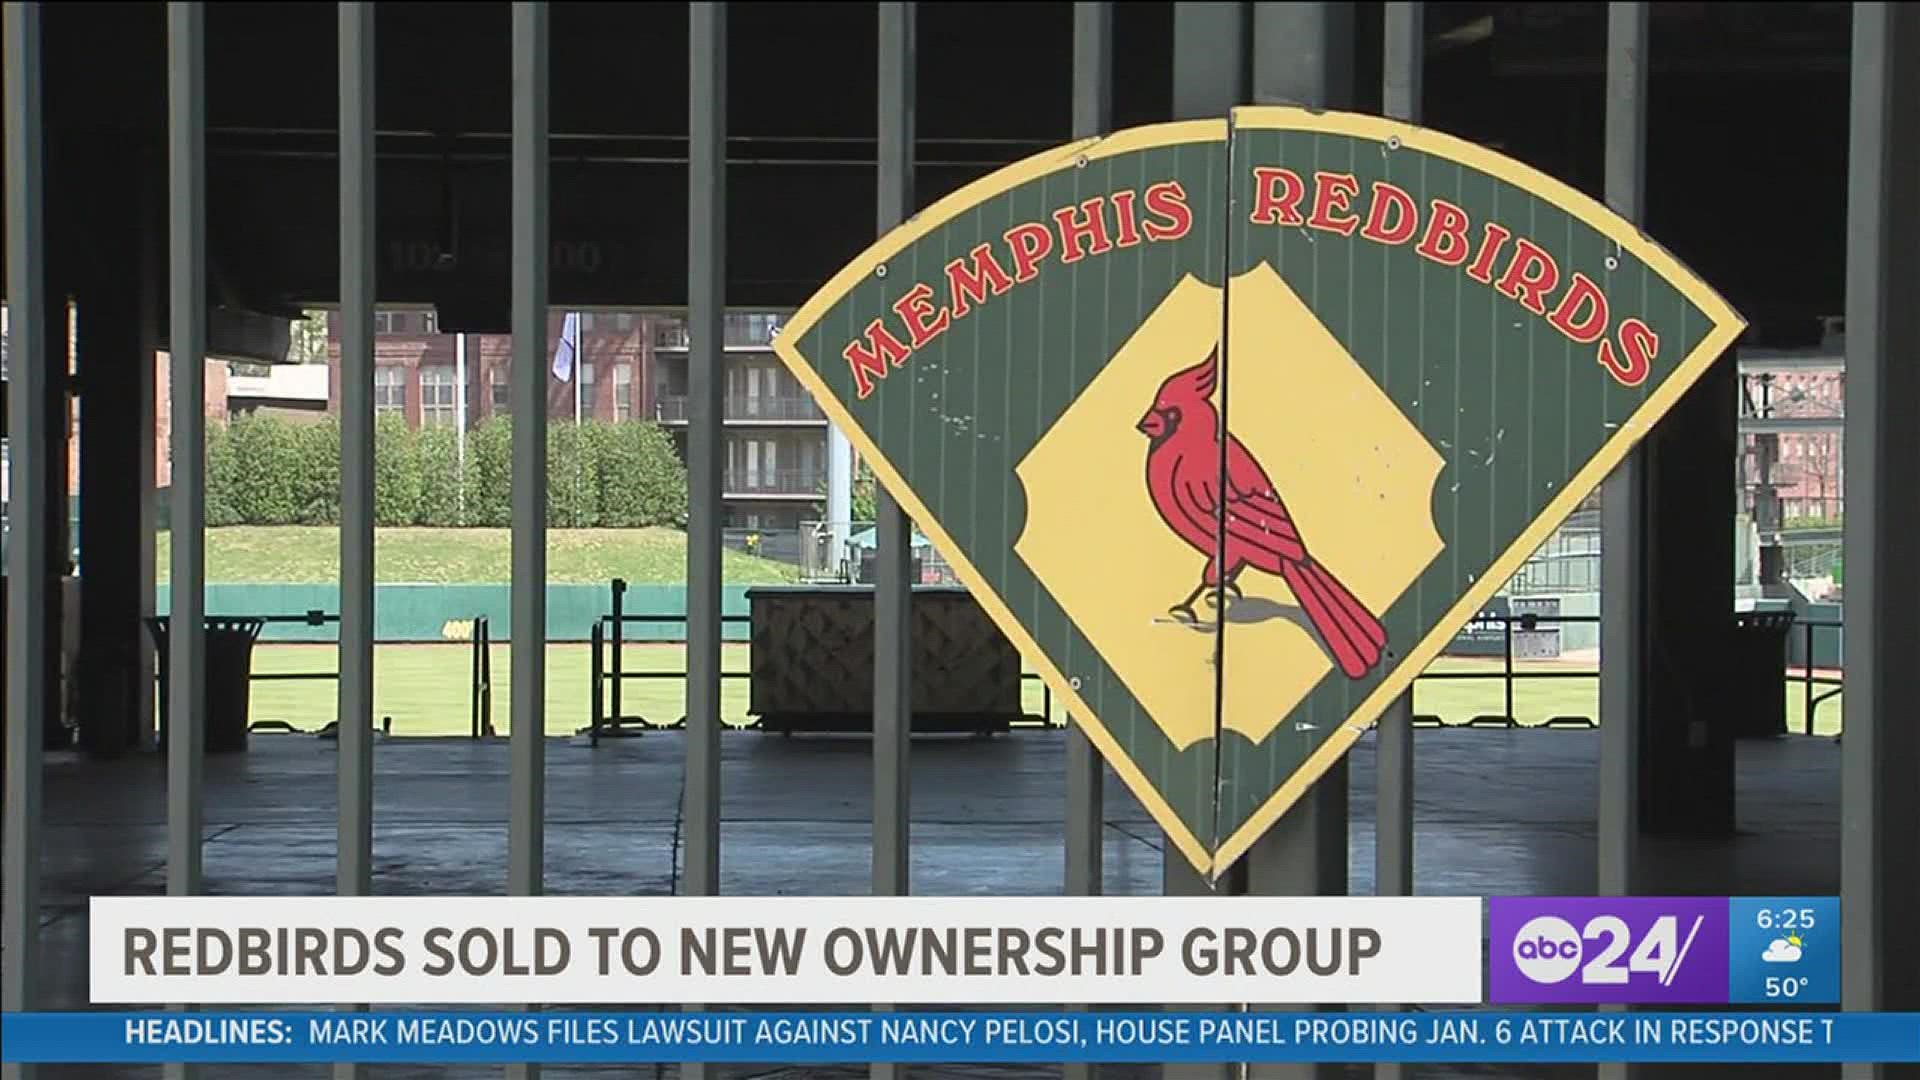 The Memphis Redbirds will continue to be led by President and GM, Craig Unger, and remain an MLB affiliate of the St. Louis Cardinals.